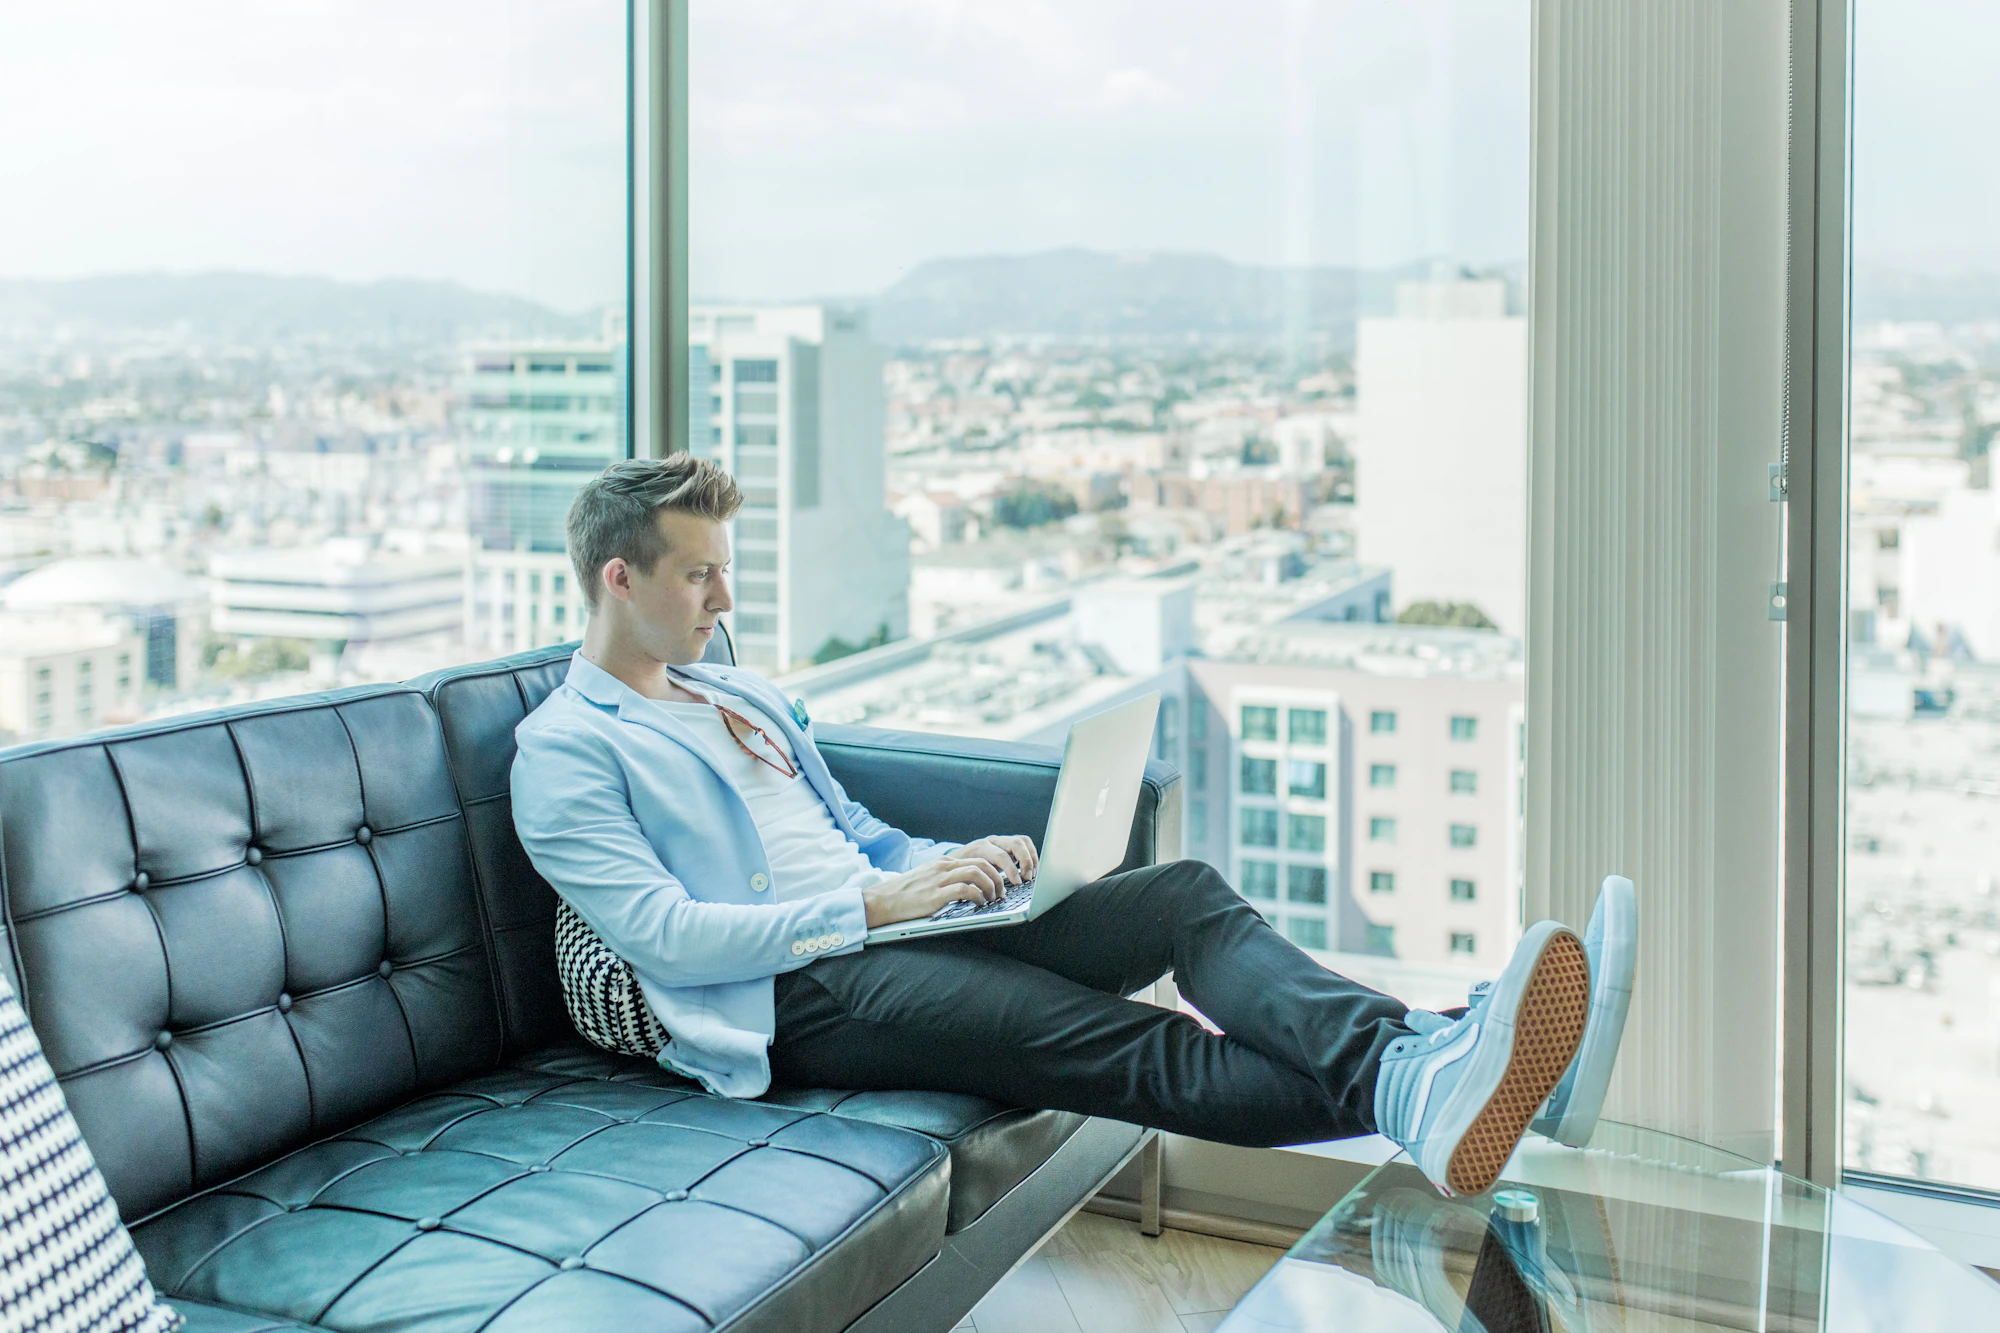 Ikamet client, a digital nomad, on a black sofa in a high-rise with floor-to-ceiling windows.